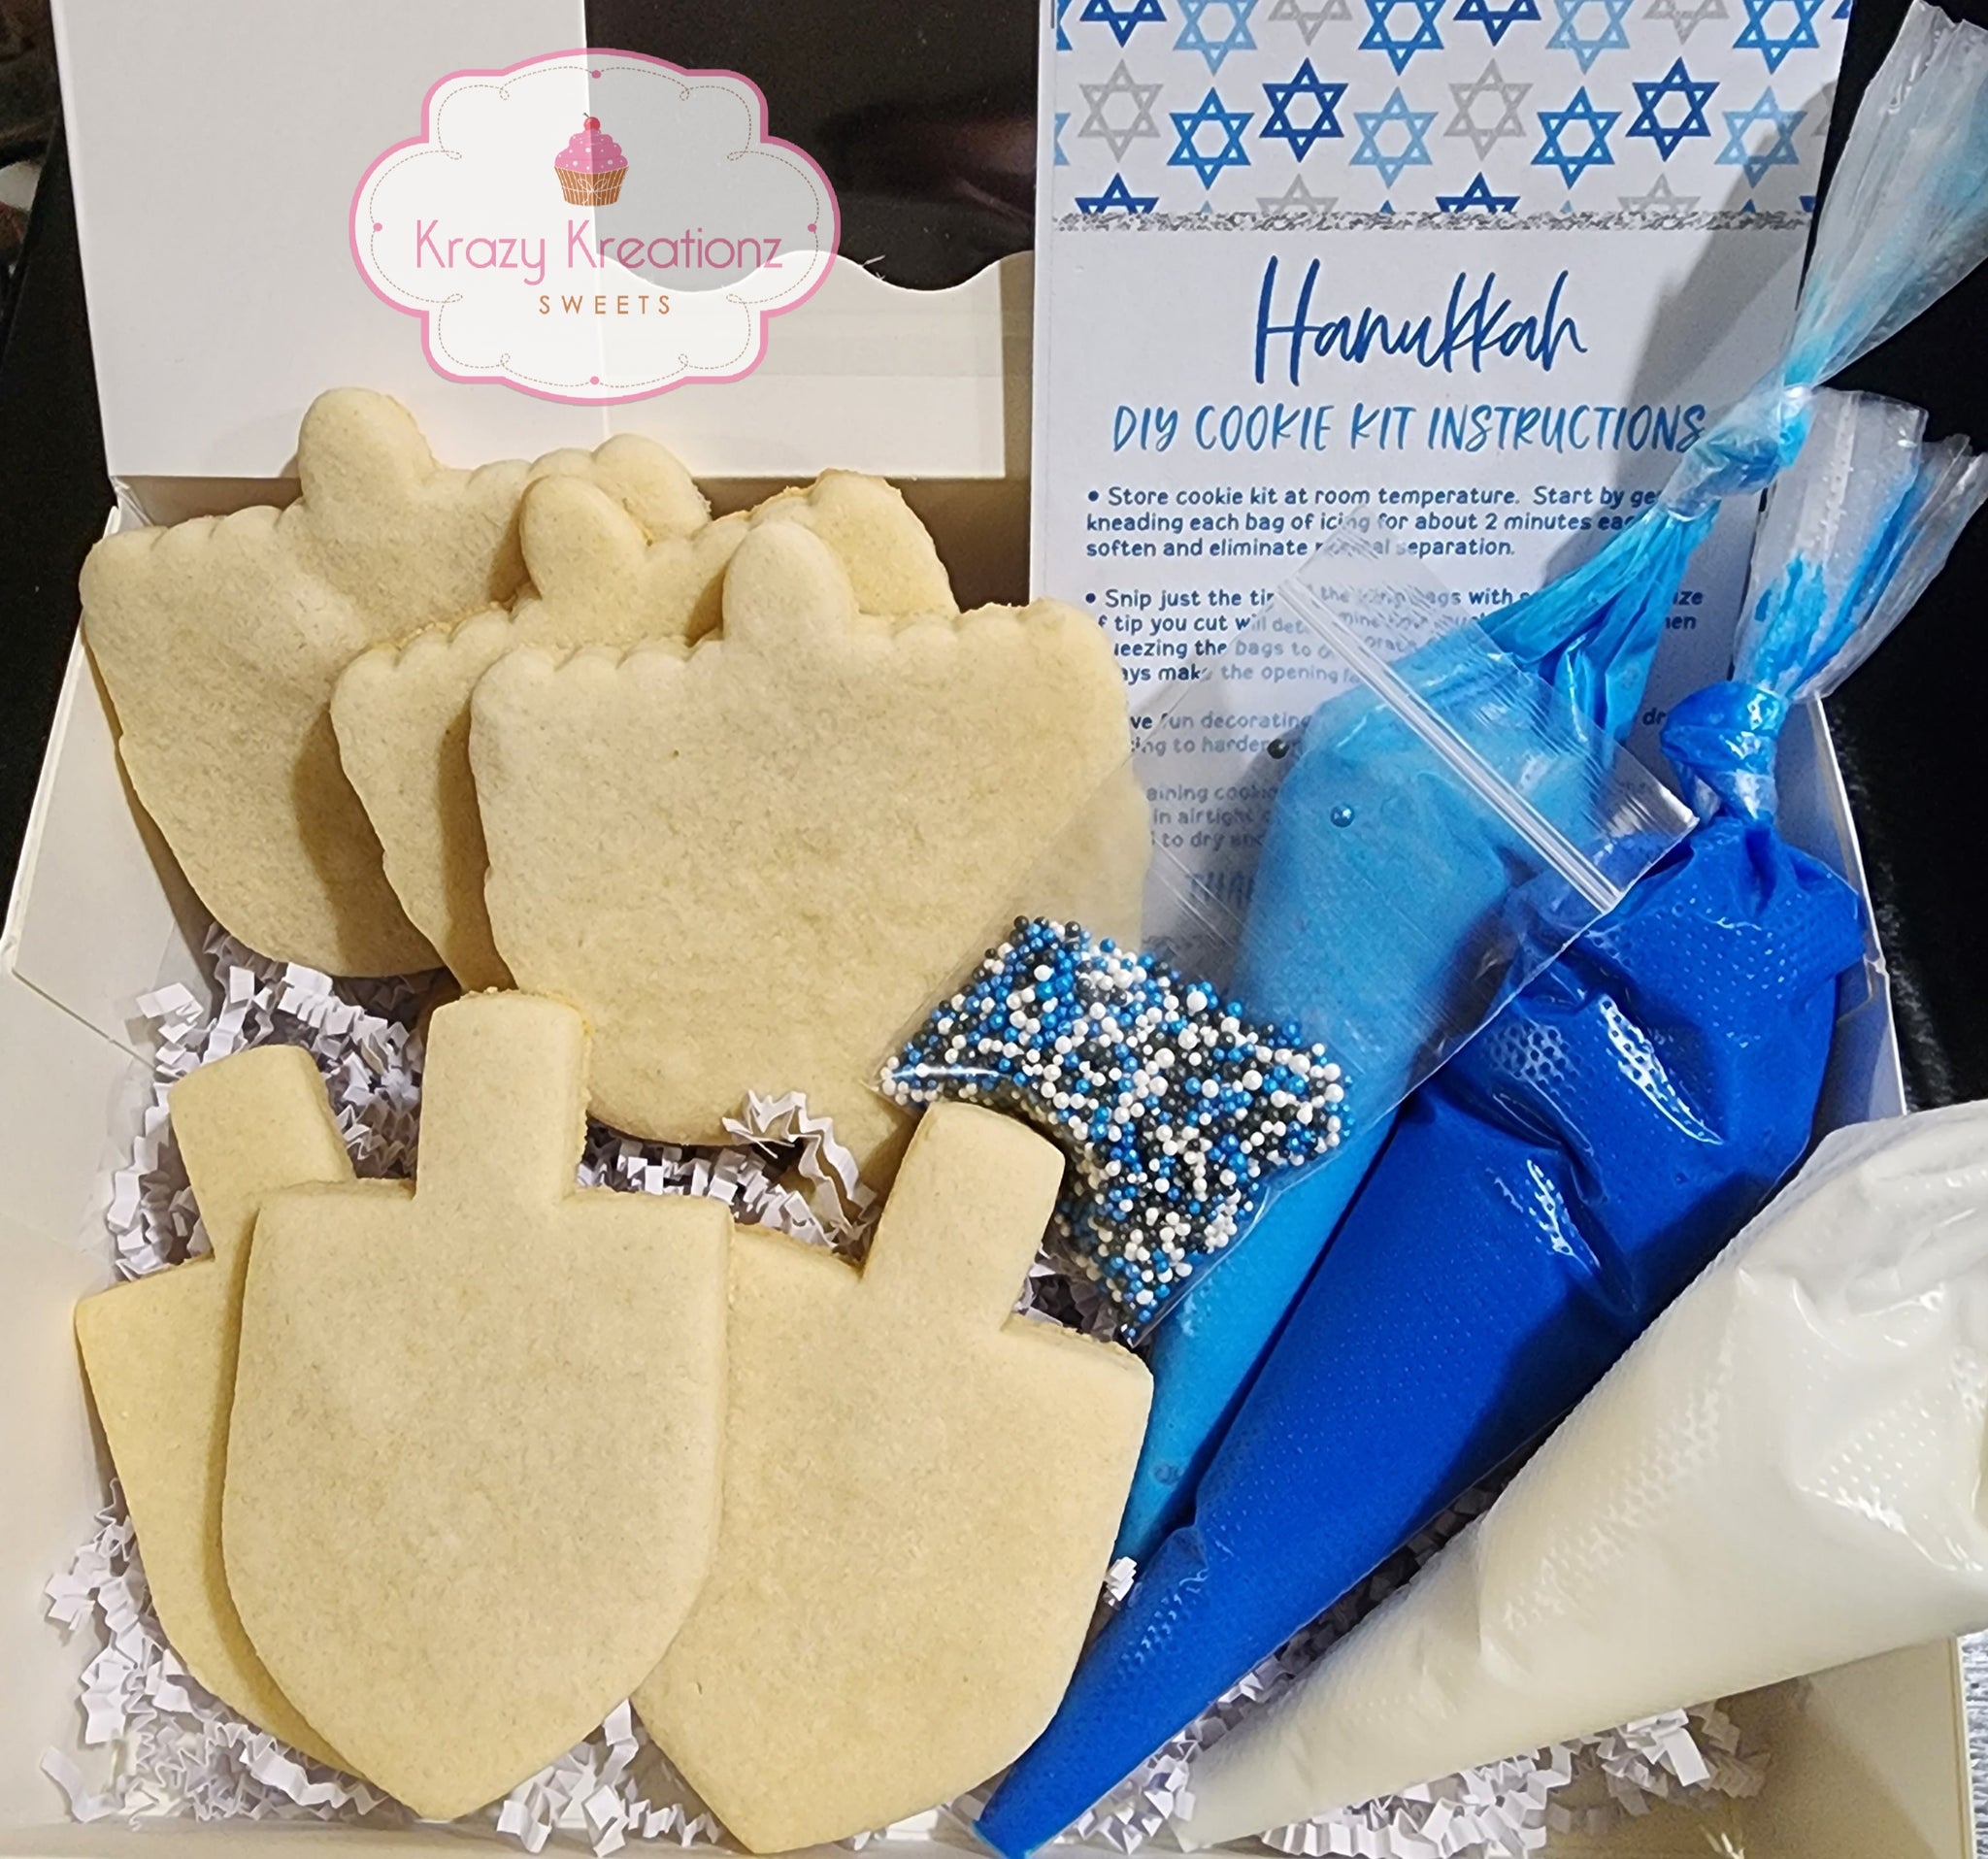 Decorate Your Own Hanukkah Cookie Kit